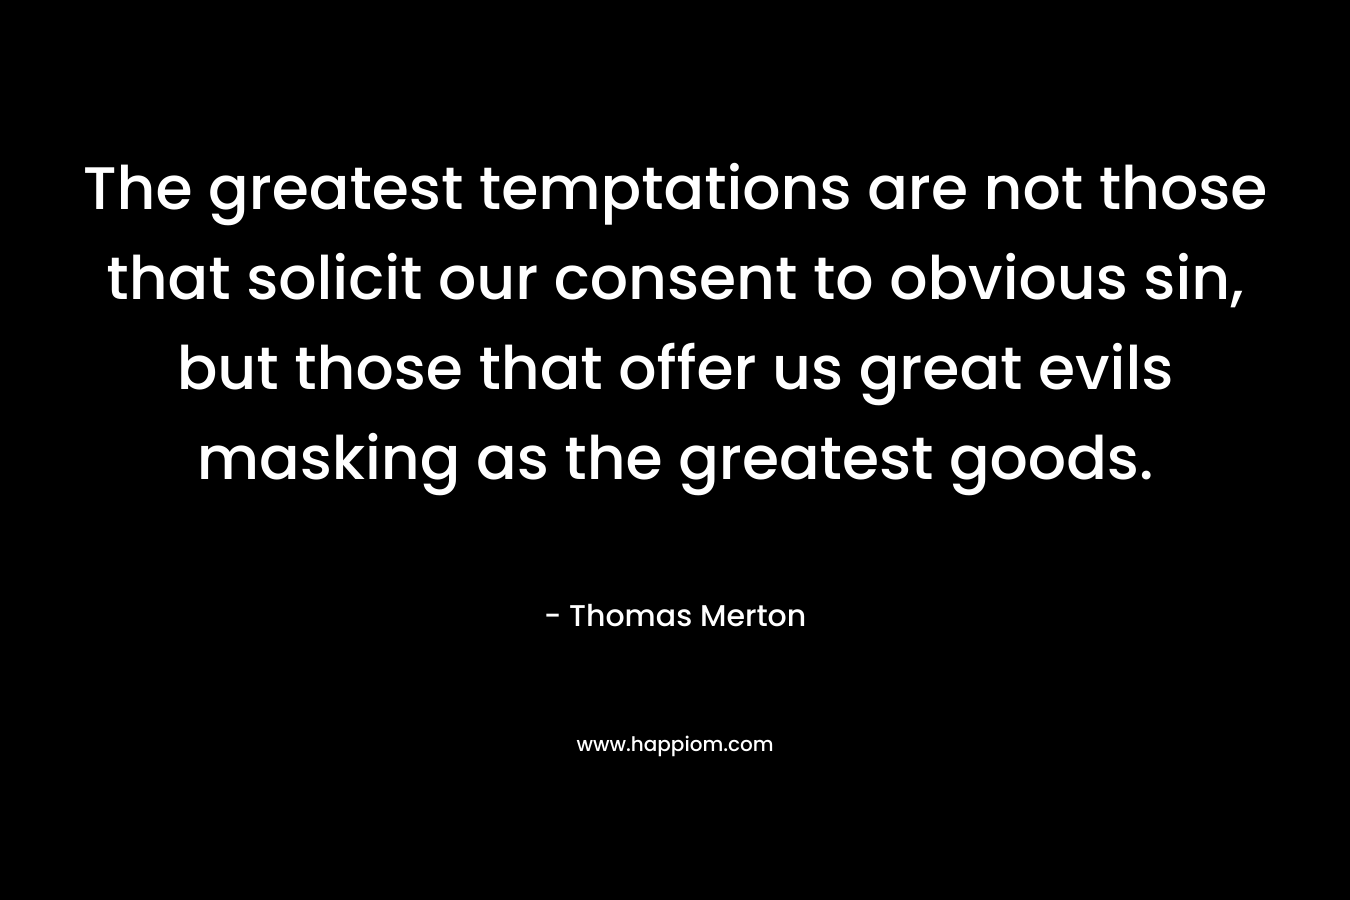 The greatest temptations are not those that solicit our consent to obvious sin, but those that offer us great evils masking as the greatest goods. – Thomas Merton